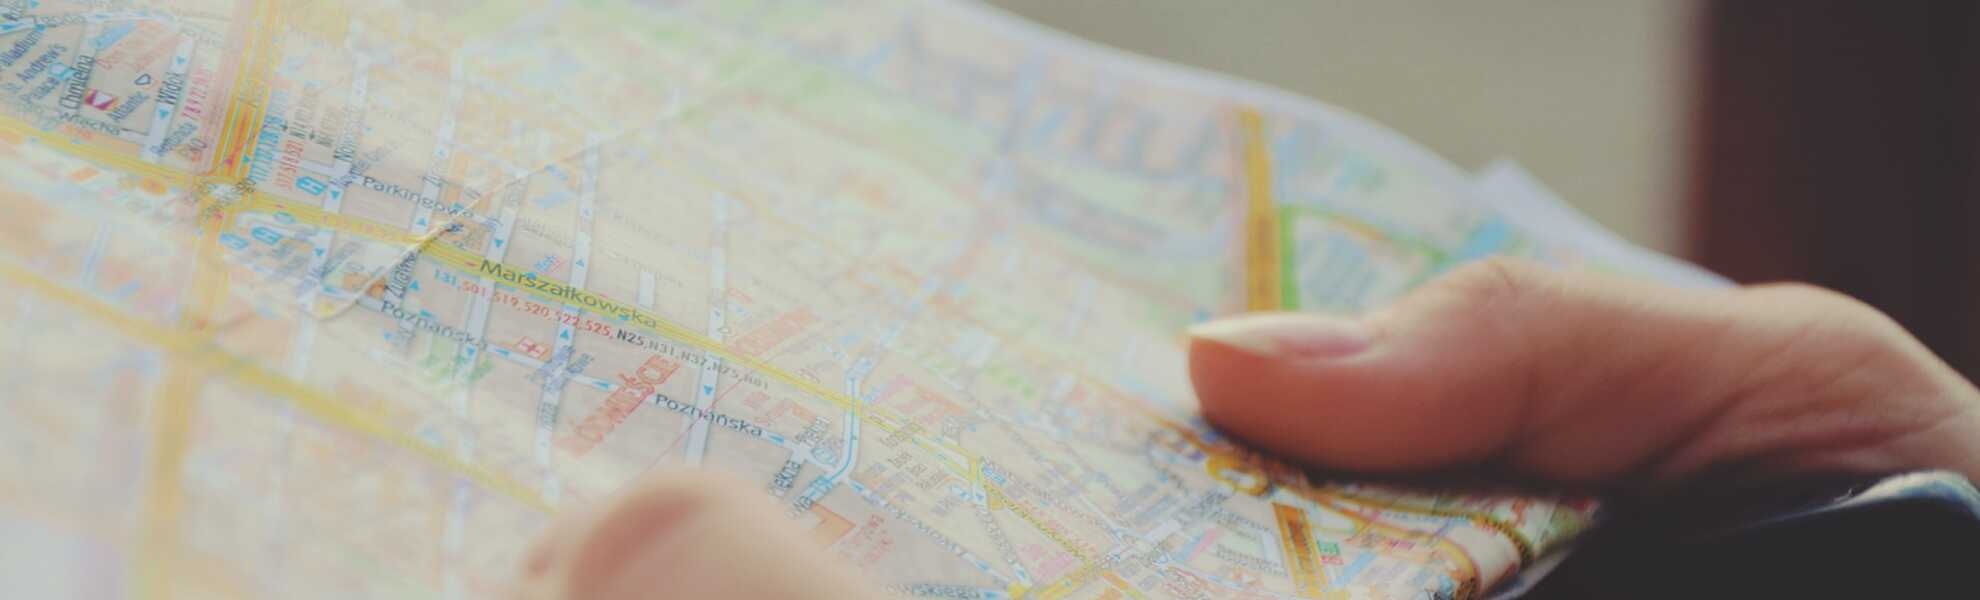 Person holding map